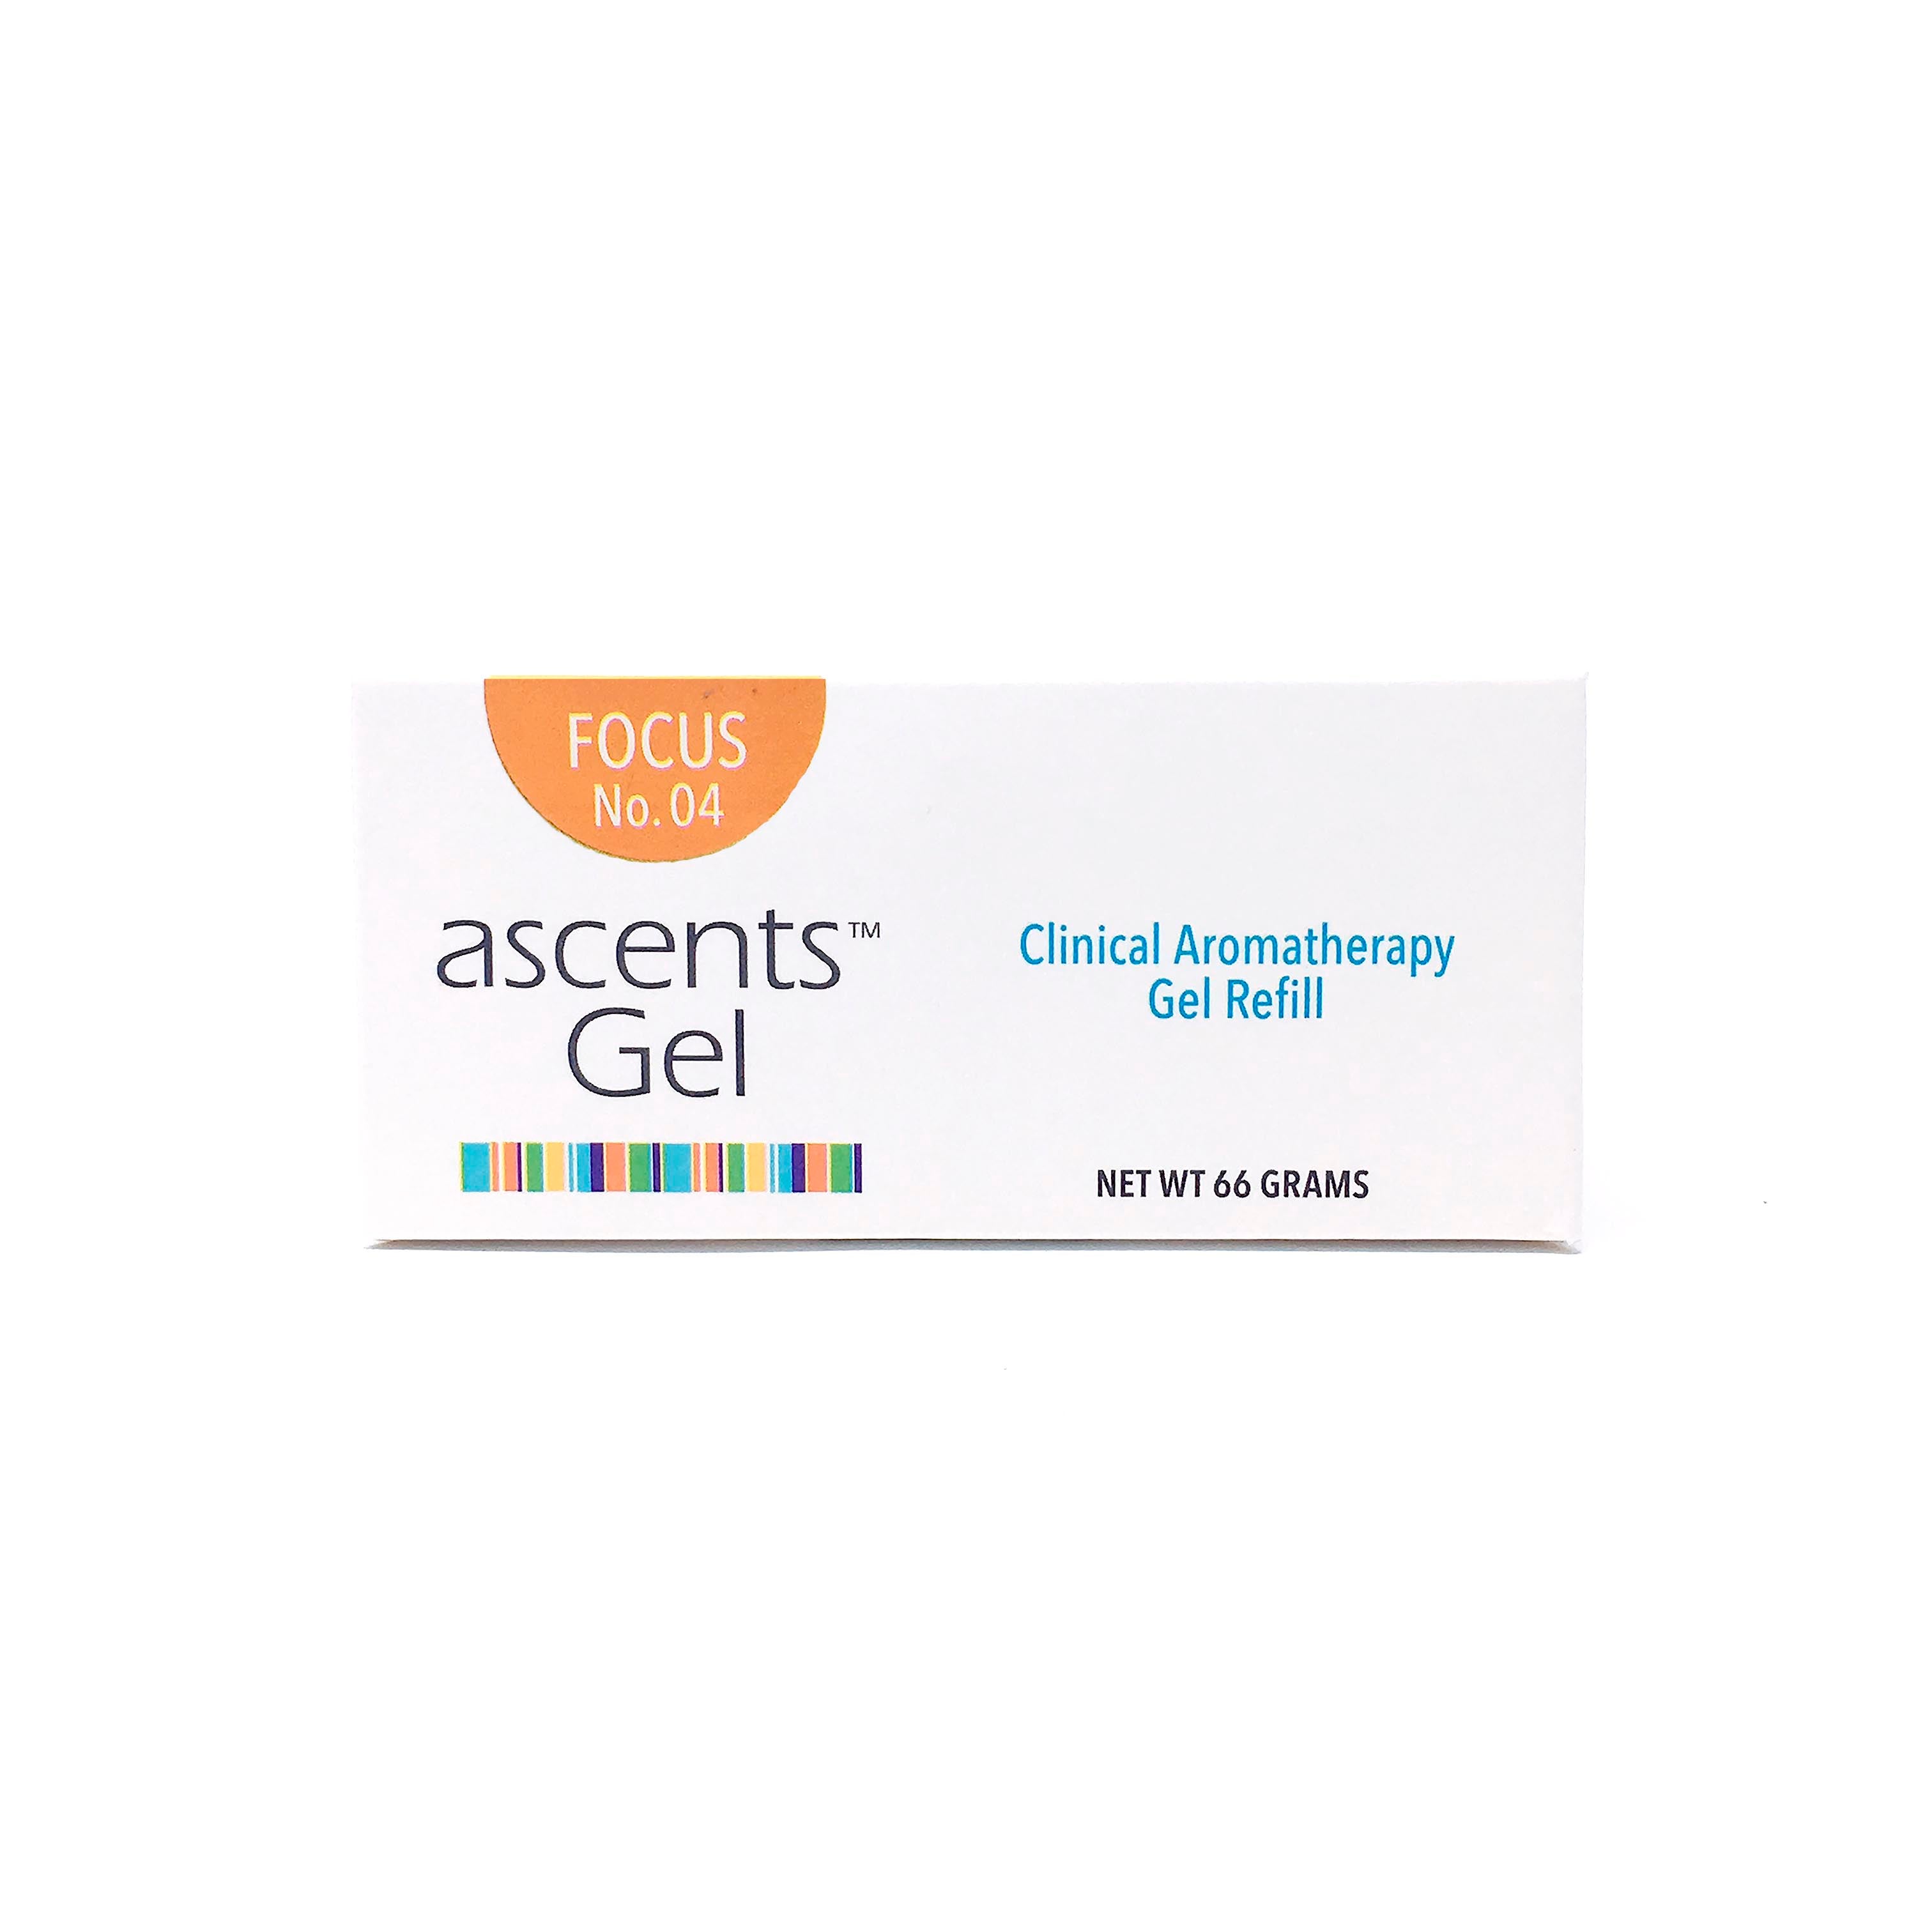 Focus Gel - For Concentration & Productivity